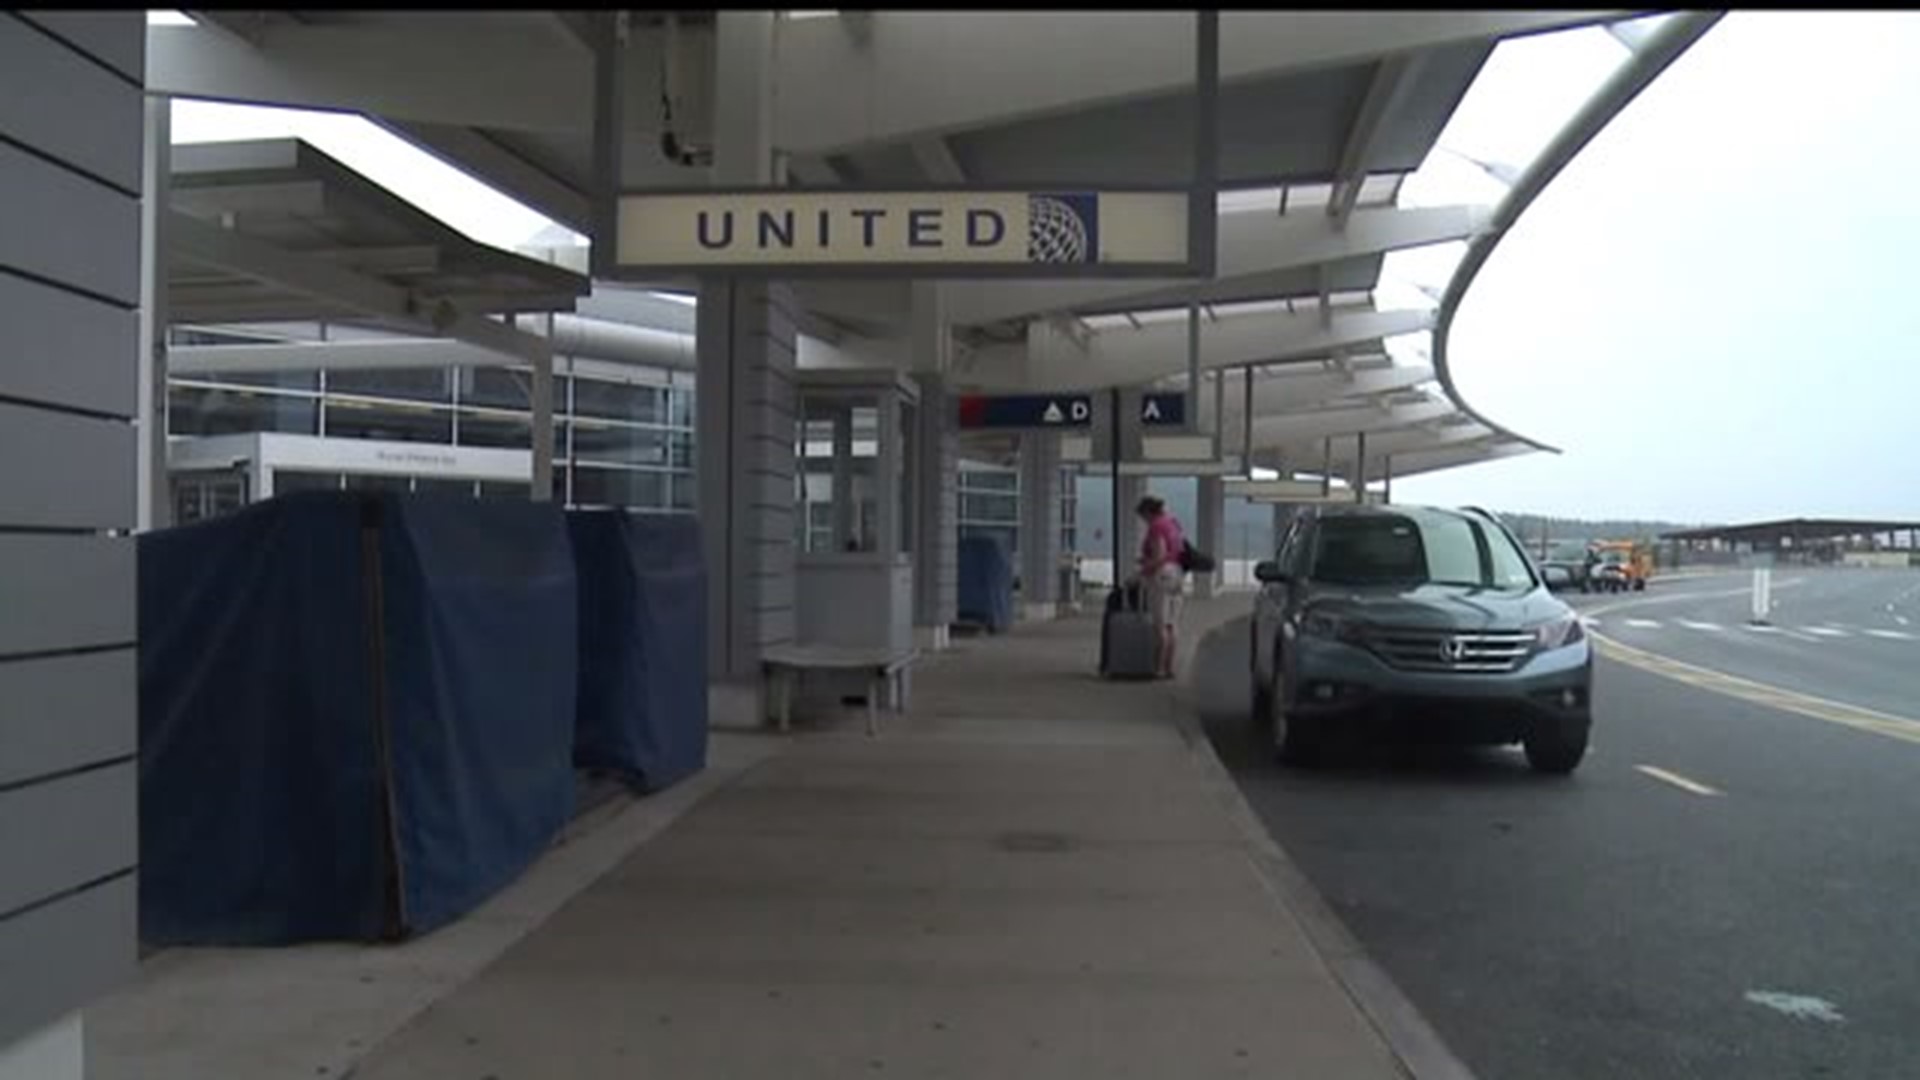 United Airlines` grounded flights cause delays at Harrisburg International Airport